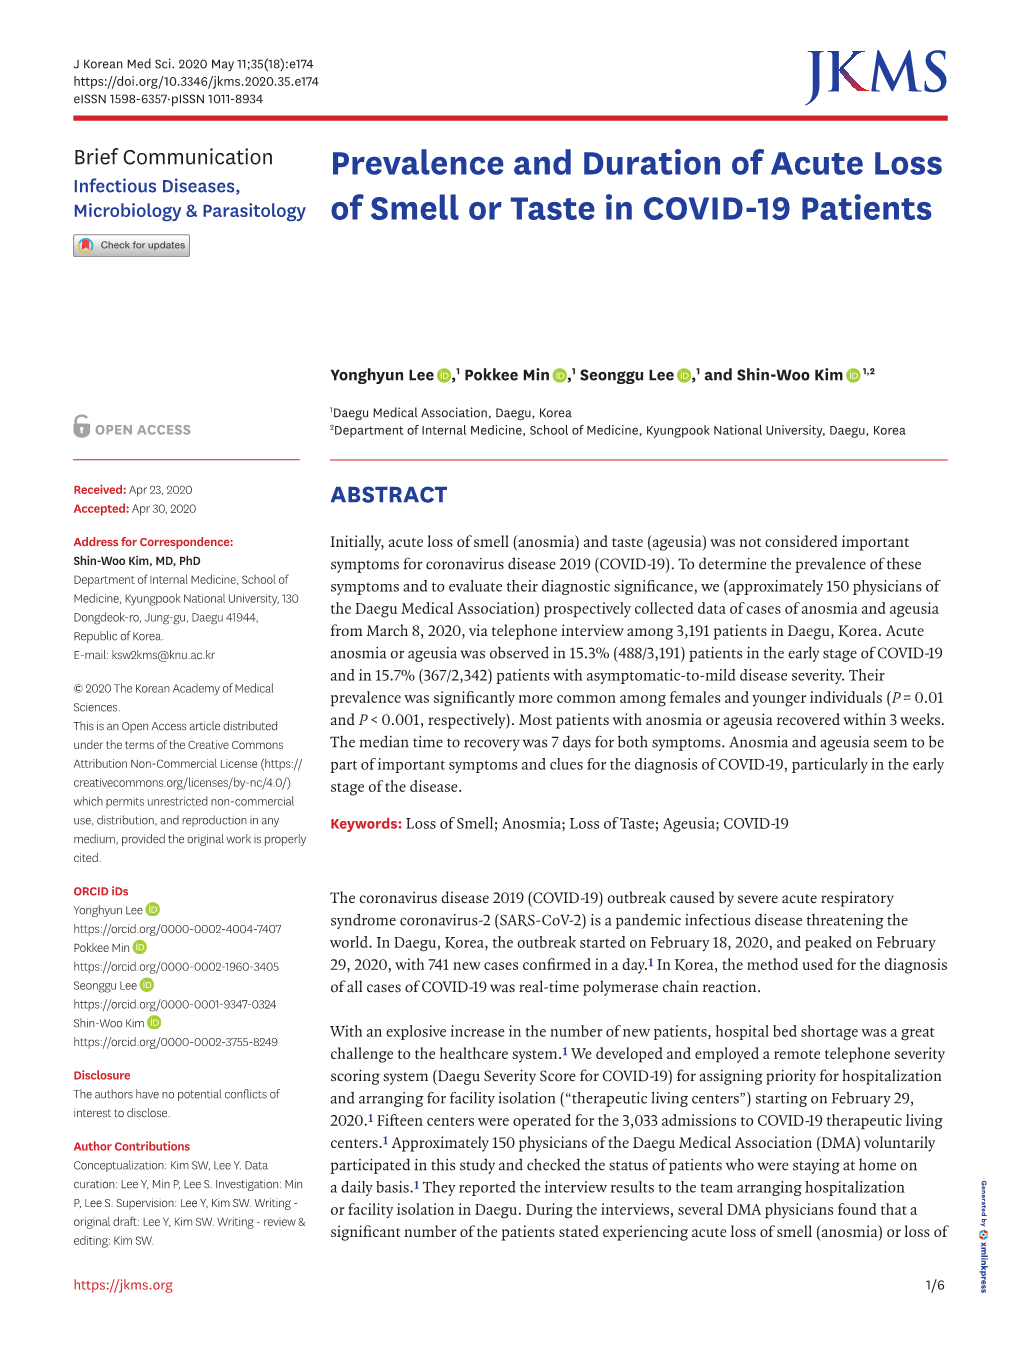 Prevalence and Duration of Acute Loss of Smell Or Taste in COVID-19